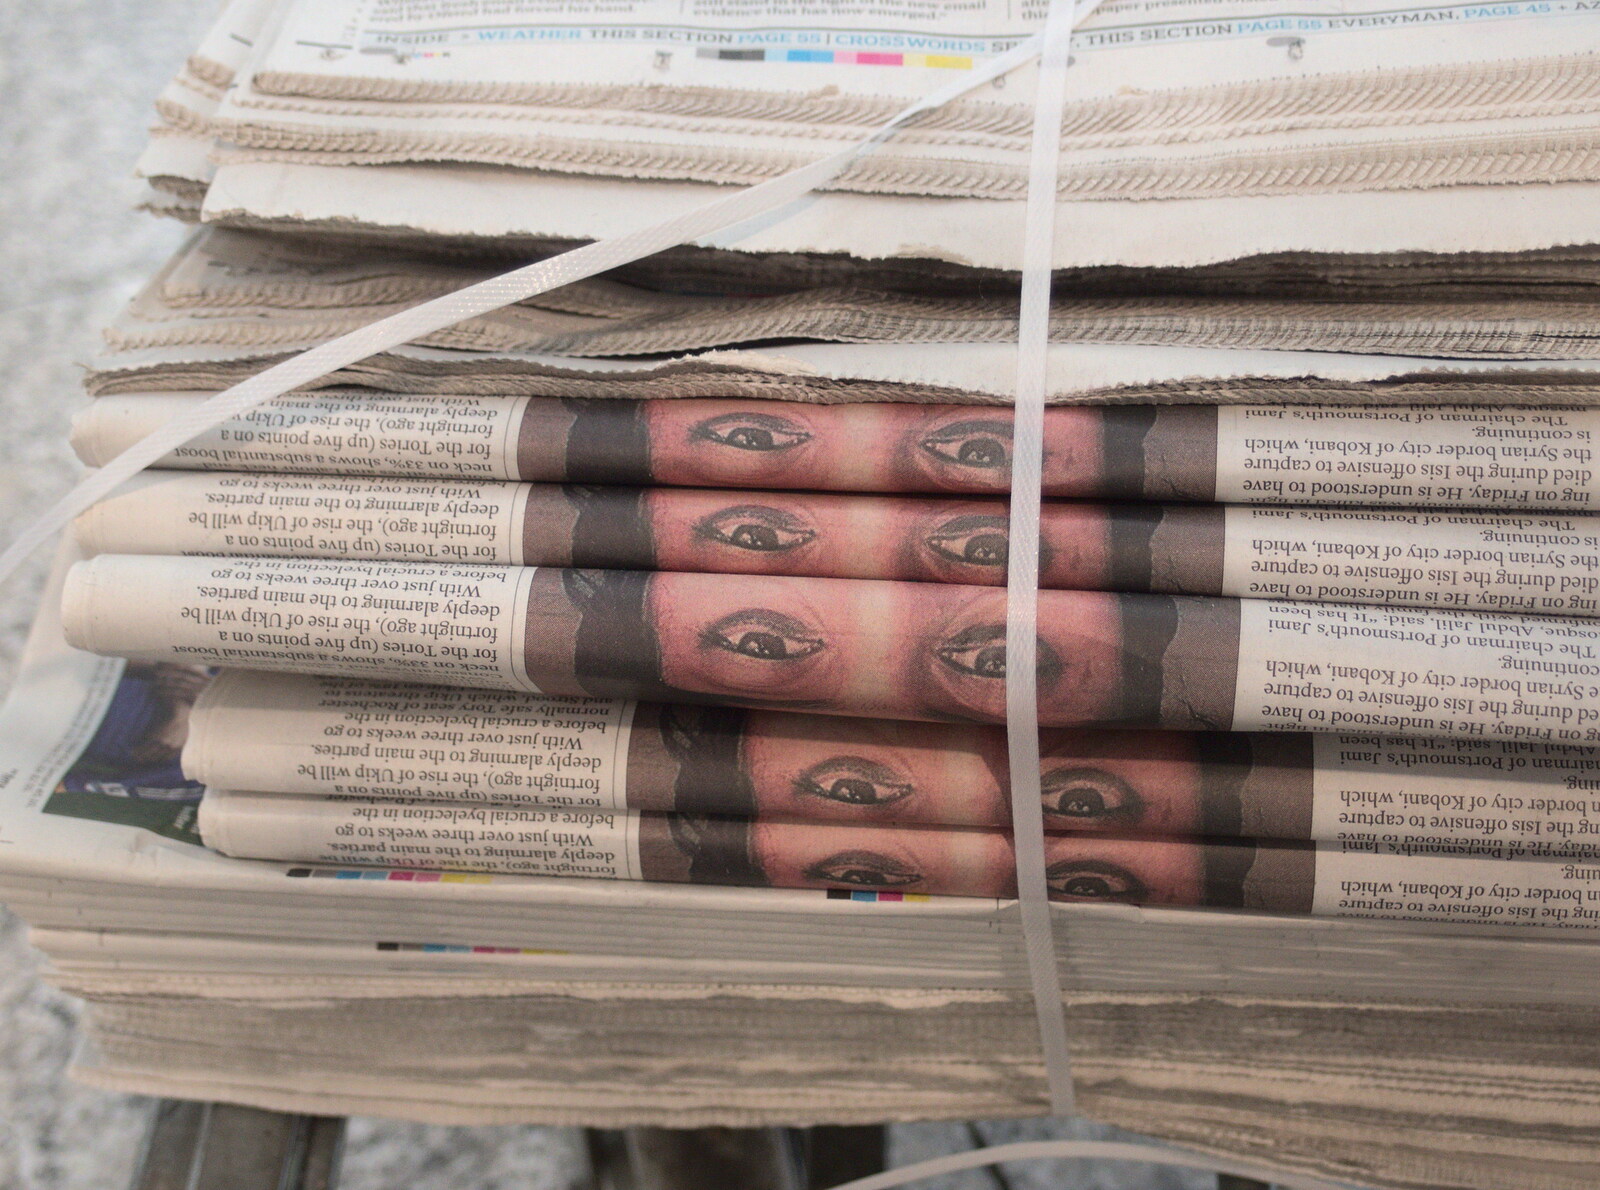 Loads of eyes stare out from a stack of newspapers from A Bomb Scare and Fred Does Building, London and Suffolk - 30th October 2014